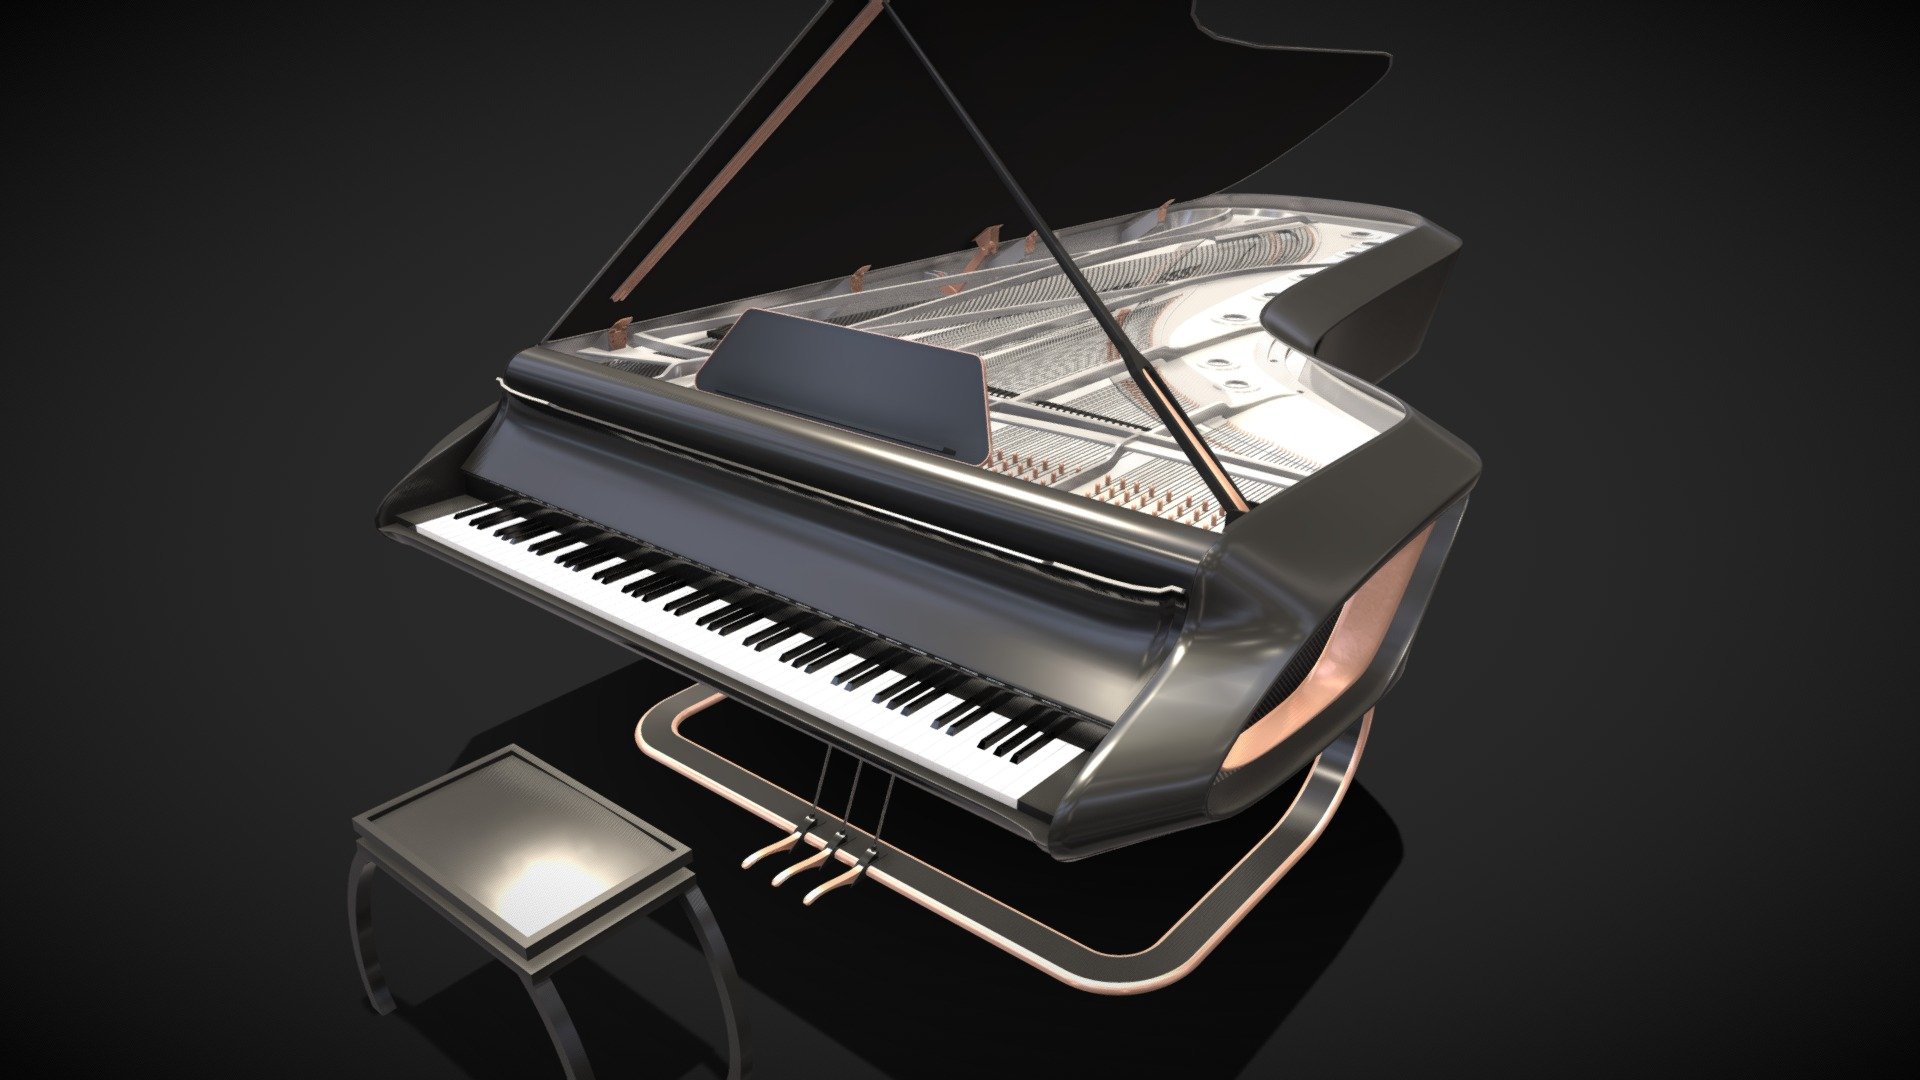 A modern piano designed by me. 

More information about the project here : https://www.behance.net/gallery/86665435/Grand-Piano-Design

Animation : The keyboard cover can be opened, and the main cover opens and closes with the associated mechanism. The partition support and the bar that maintain the piano open are rigged too. I isolated and numbered the 88 keys, they move individually. Same of the pedals. Hammers are grouped and can go down by lowering the Y coordinate

High definition textures. Ready to render. -No N-gones (less than 1%) -No Isolated vertices -No Overlapping Faces -No Overlapping vertices -No Flipped Normals High quality fast render. Subdivision ready.

Creating a design from scratch takes way more time than reproducing an existing one. This is why prices are a bit higher than some other products. The advantage is that my designs are royalty free, that means you can use it in any support 3d model